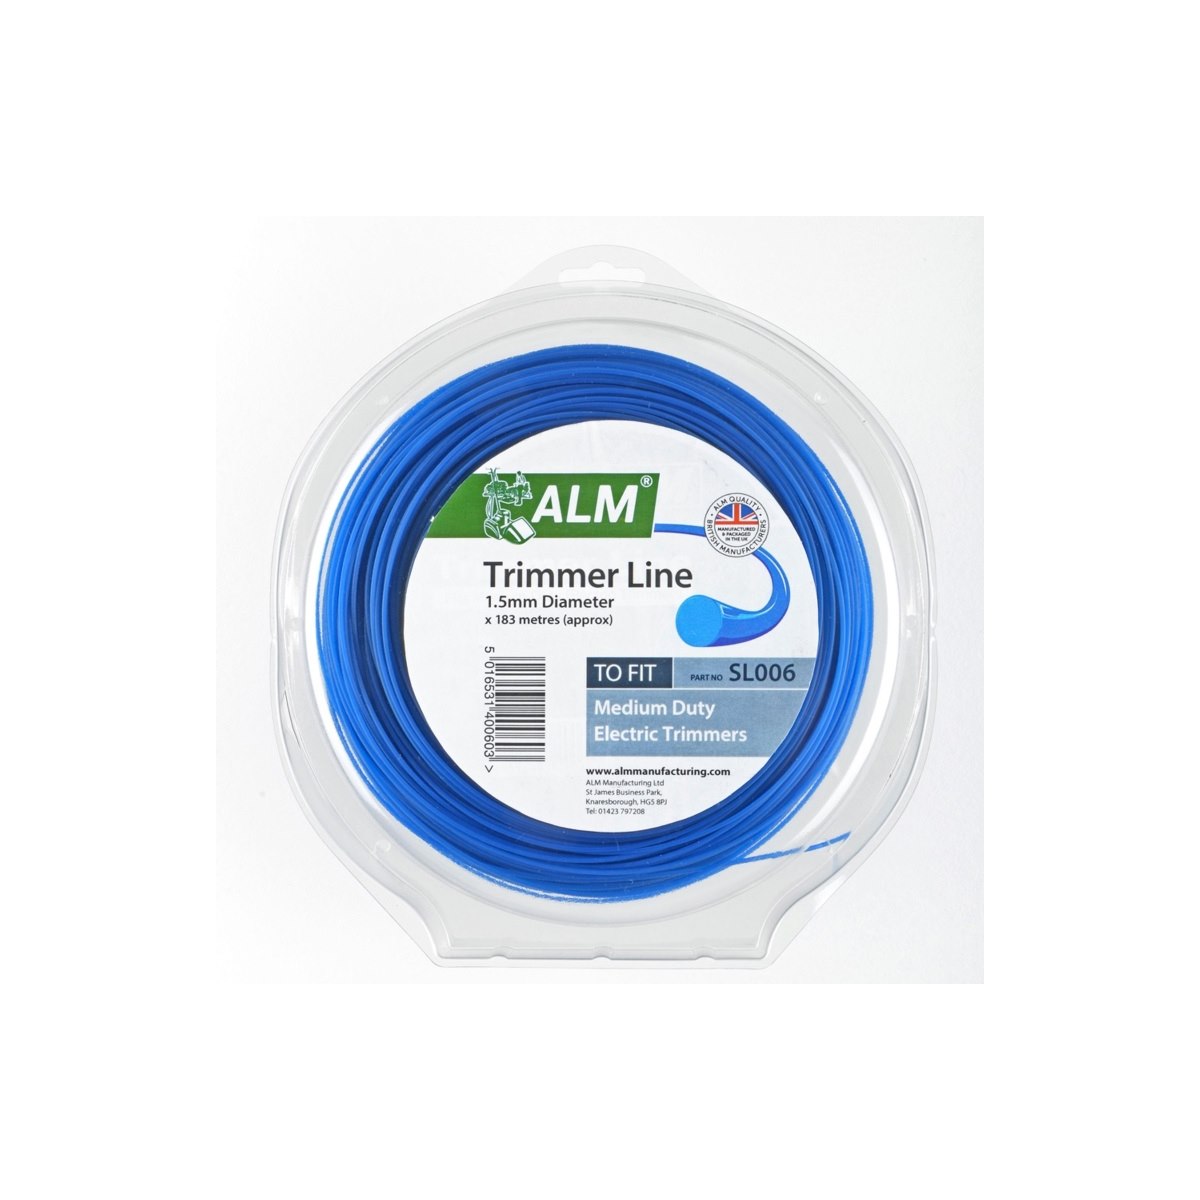 ALM SL006 Strimmer Line 183m (1.5mm) for all Medium Electric Trimmers